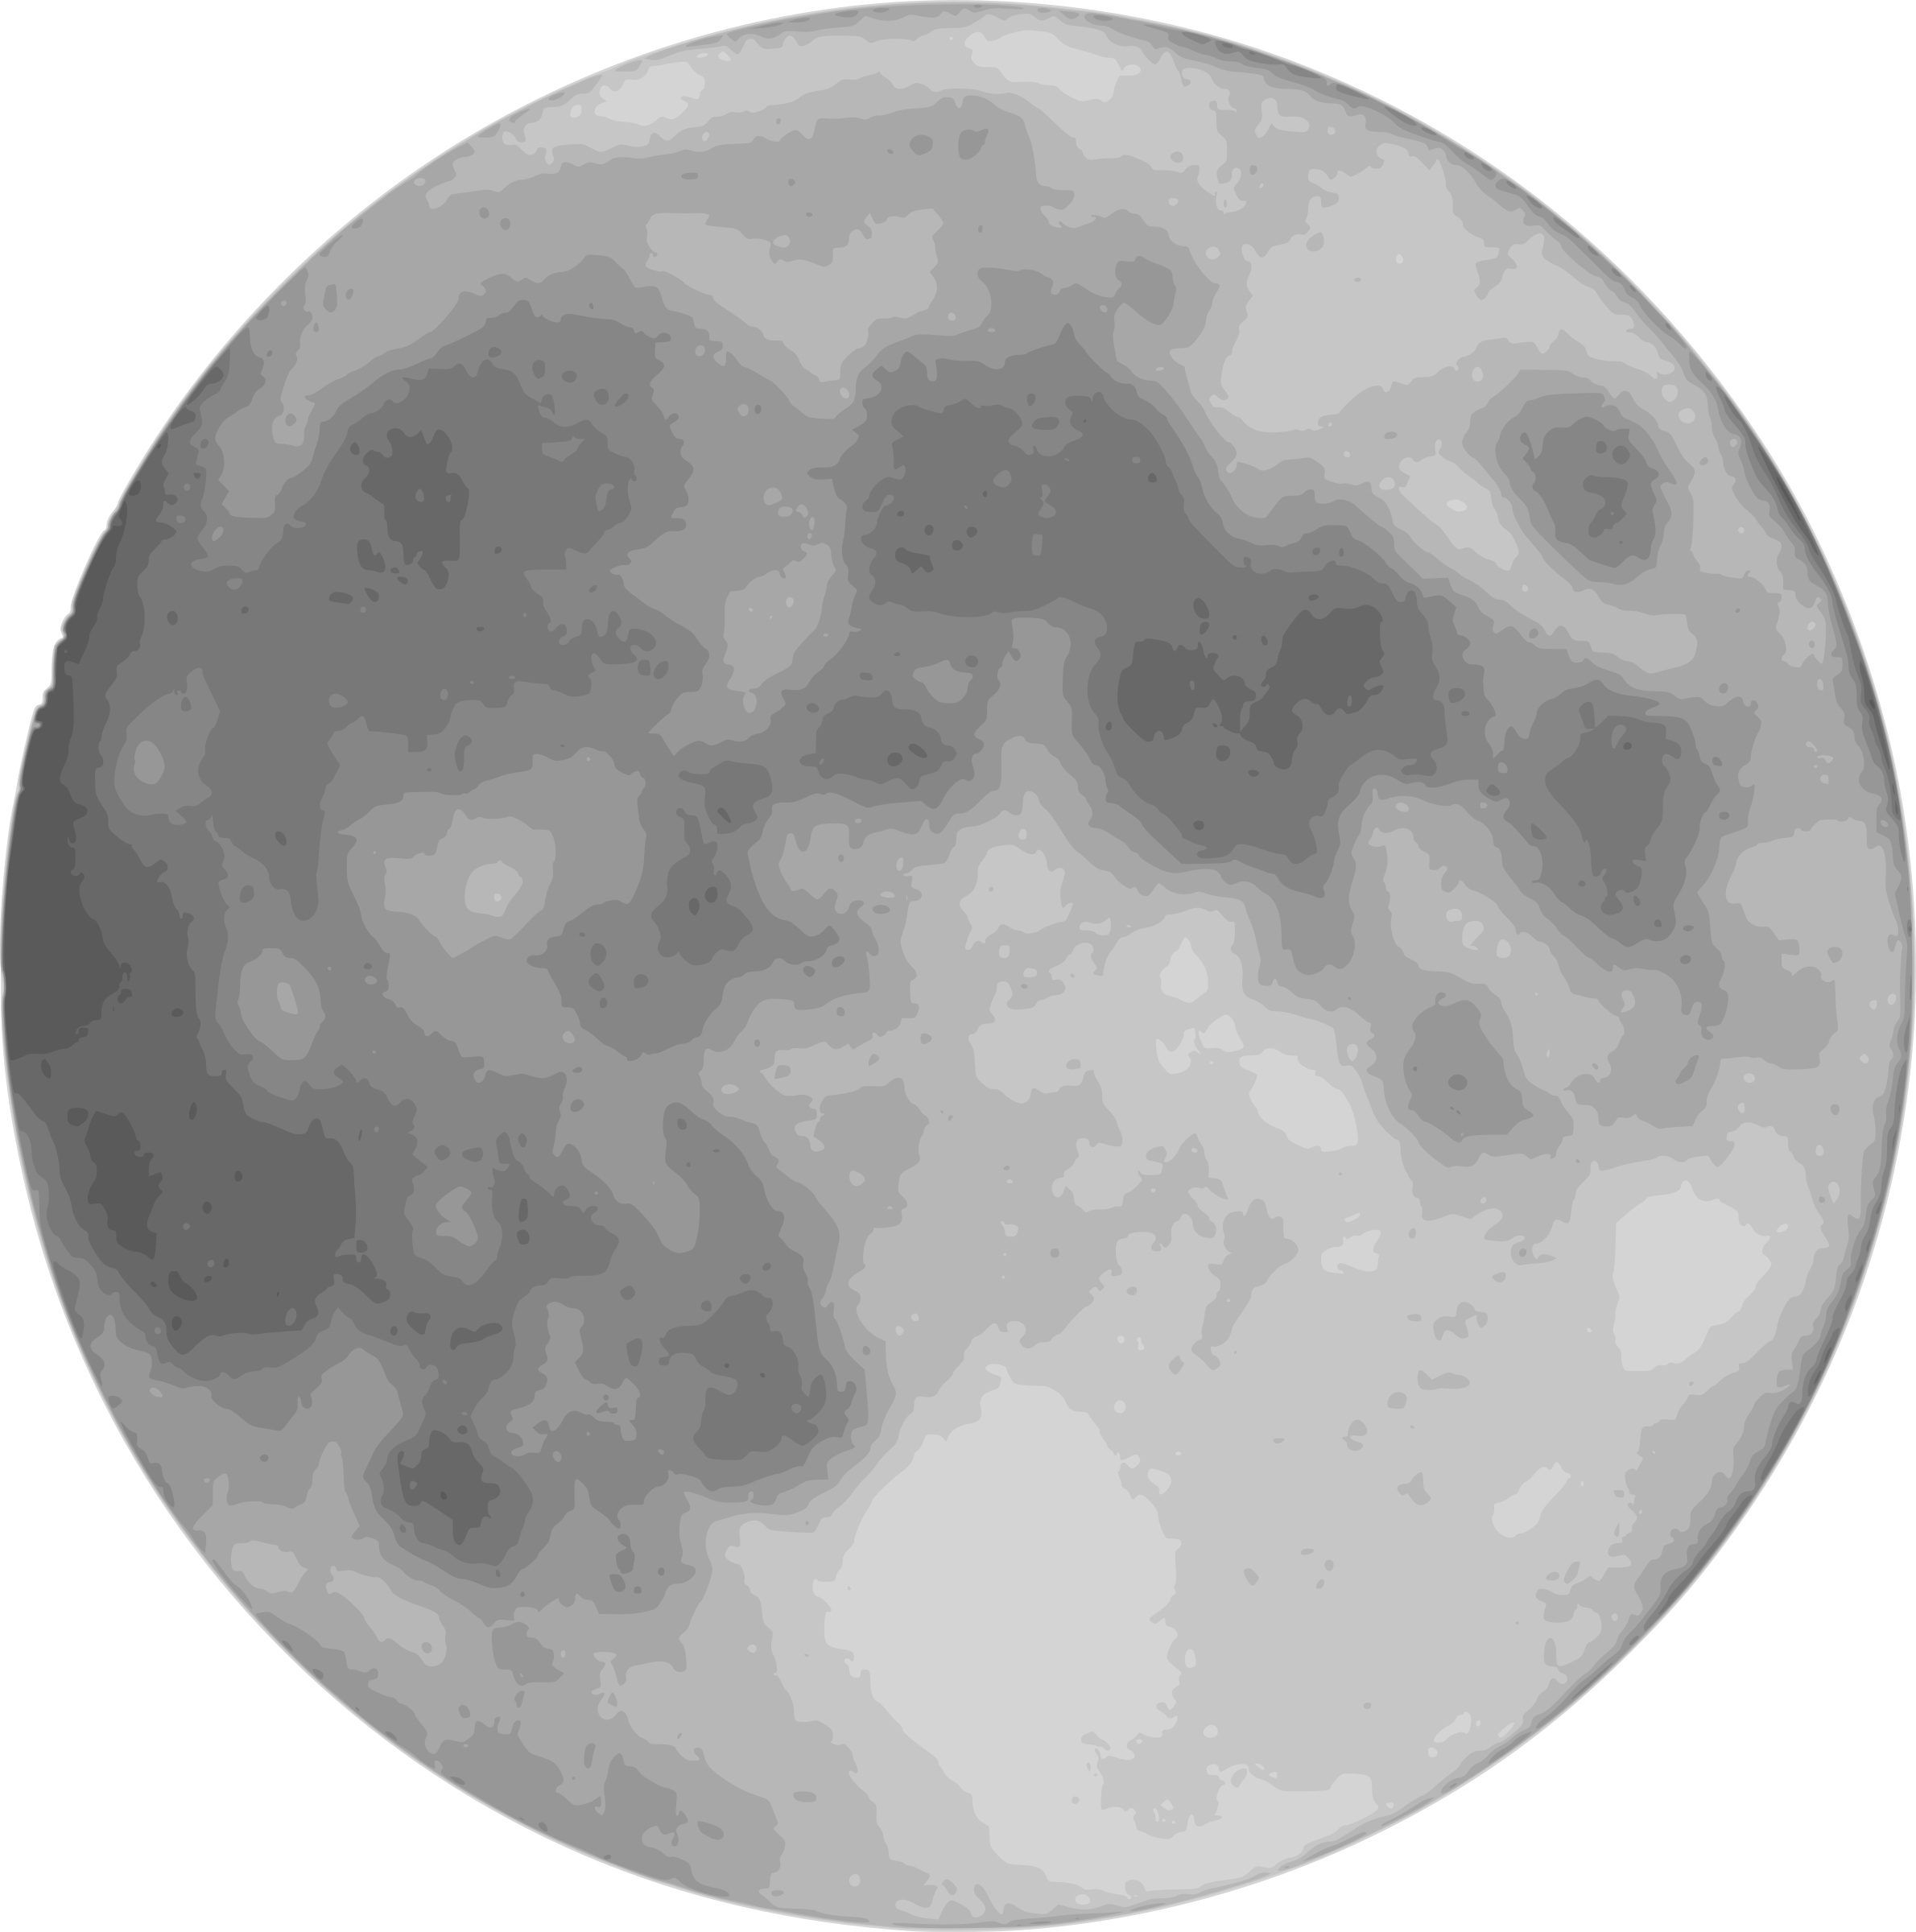 free-full-moon-transparent-background-download-free-full-moon